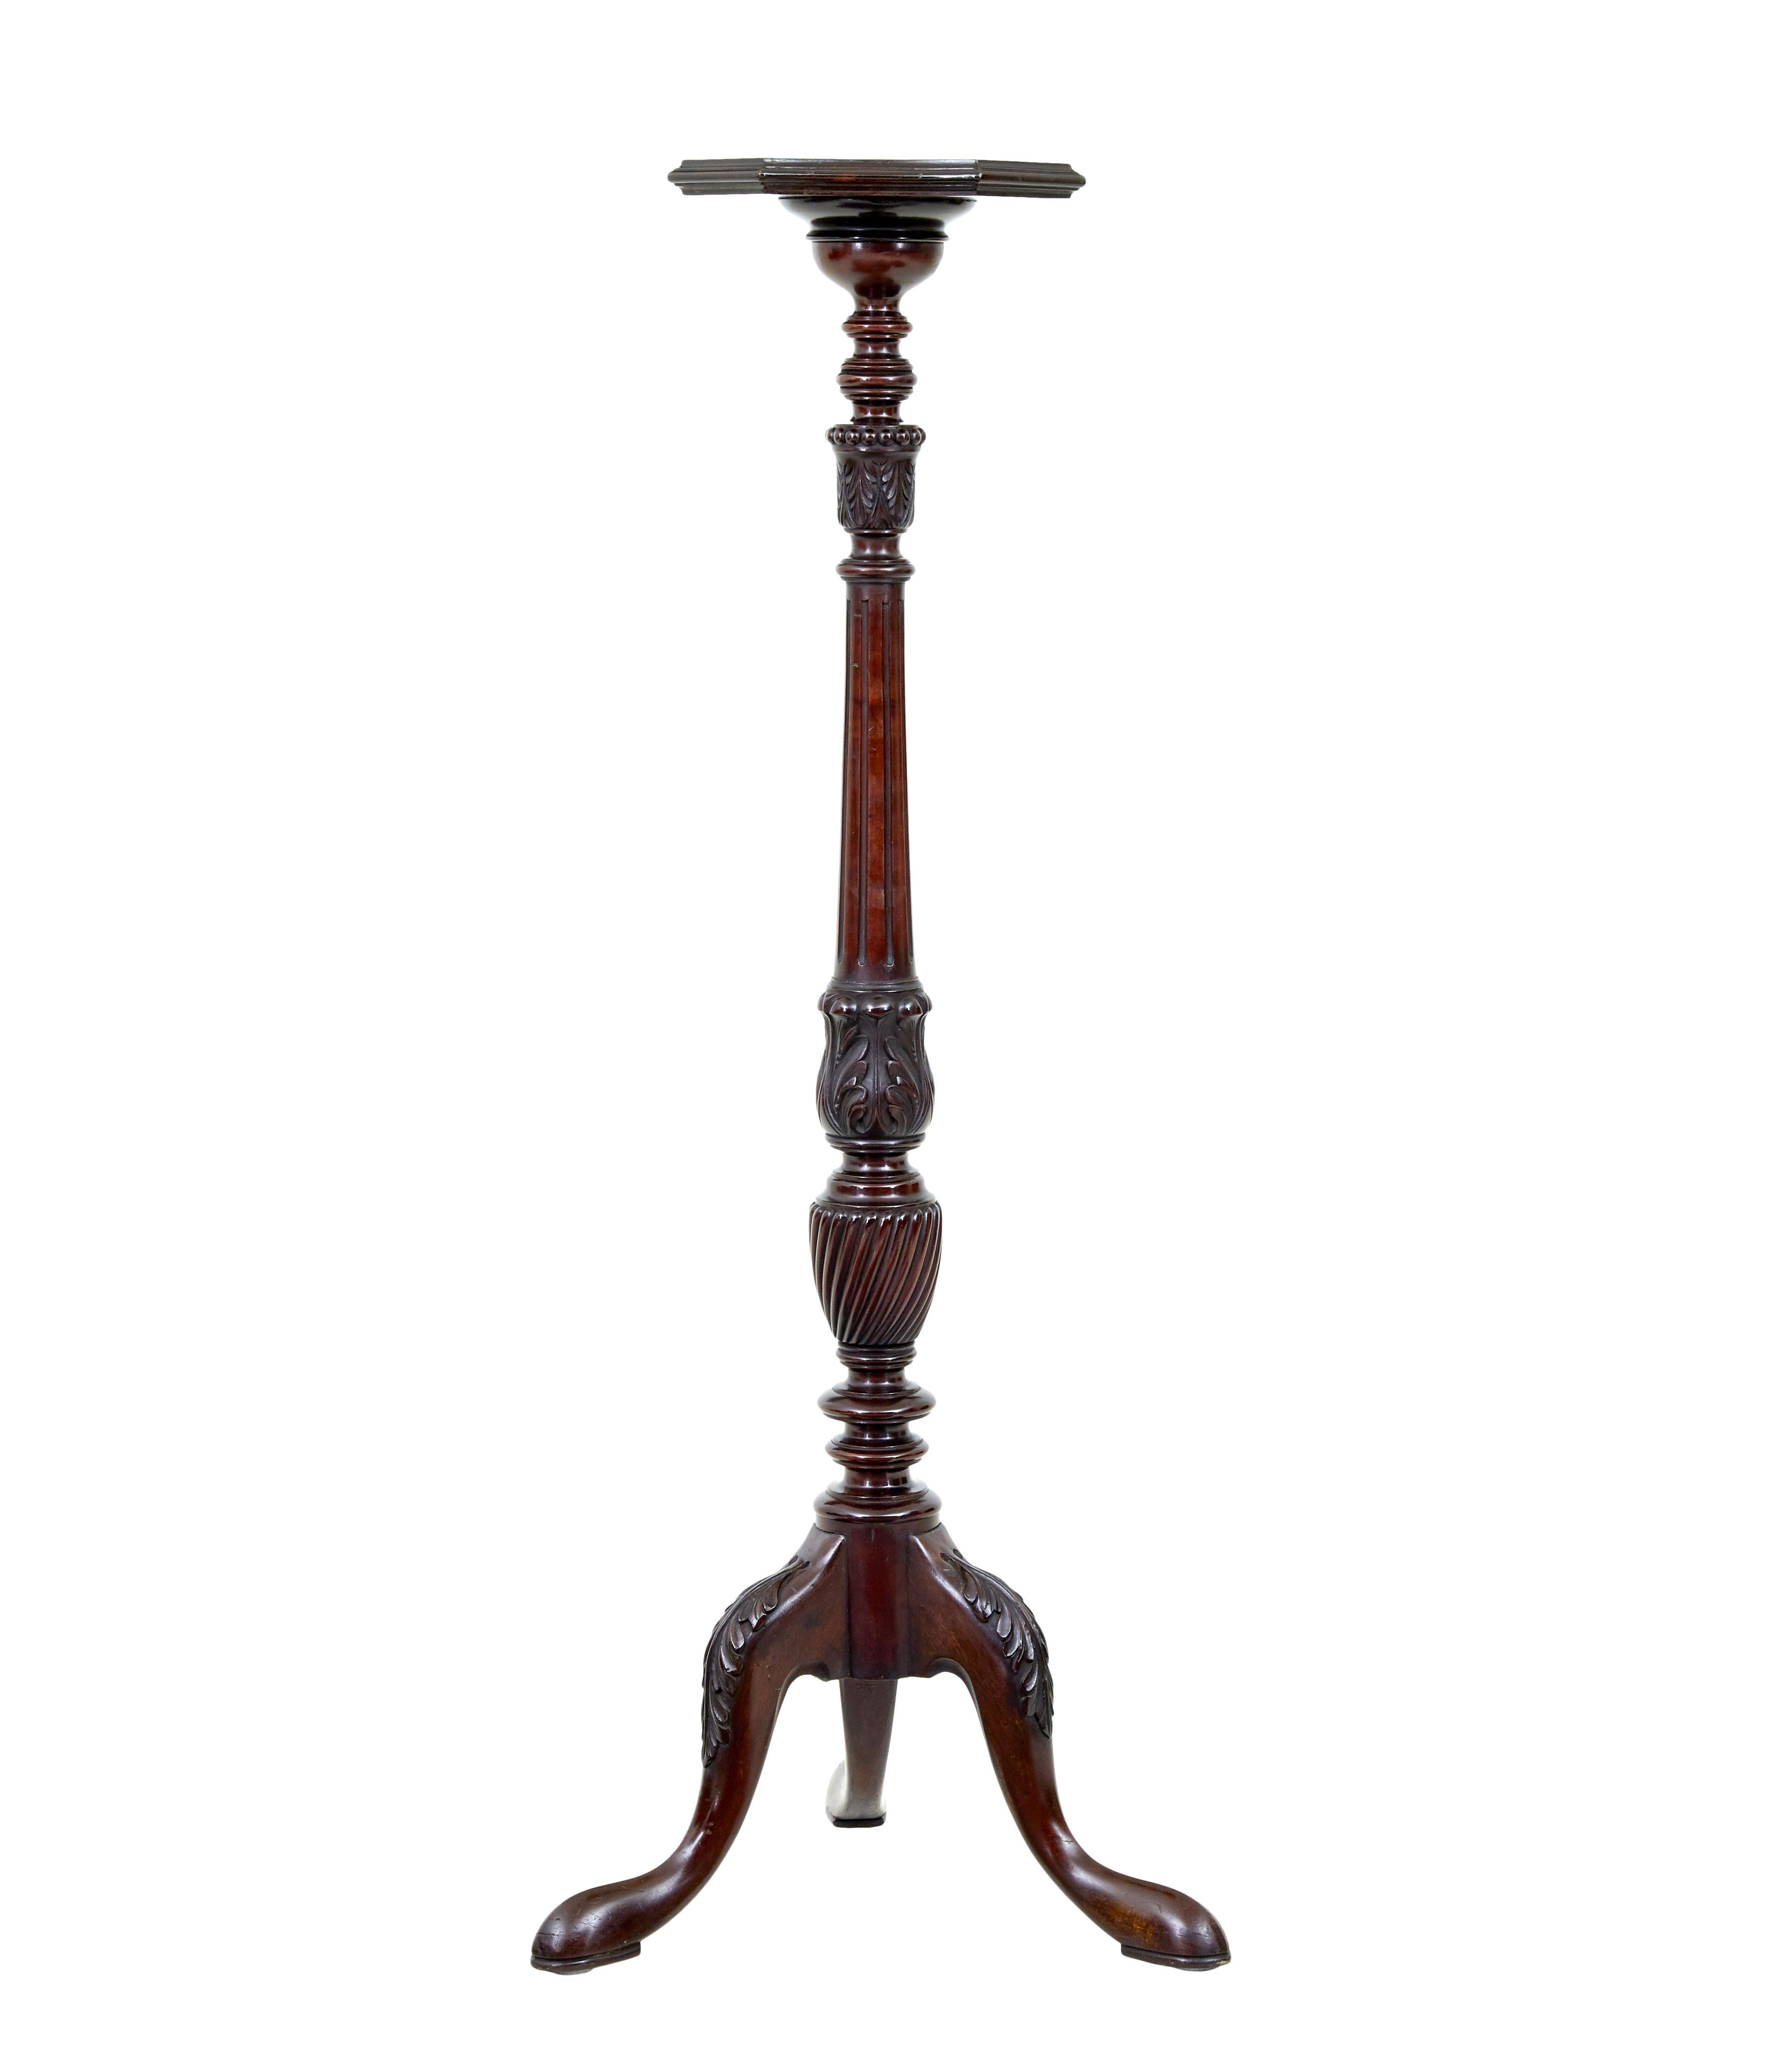 Early 20th century carved mahogany stand circa 1920.

Good quality stand, ideal for a vase of flowers in the hallway or entrance.

Shaped top with an 11″ x 11″ area. Supported by a turned and carved stem, standing on 3 cabriole legs, with carved